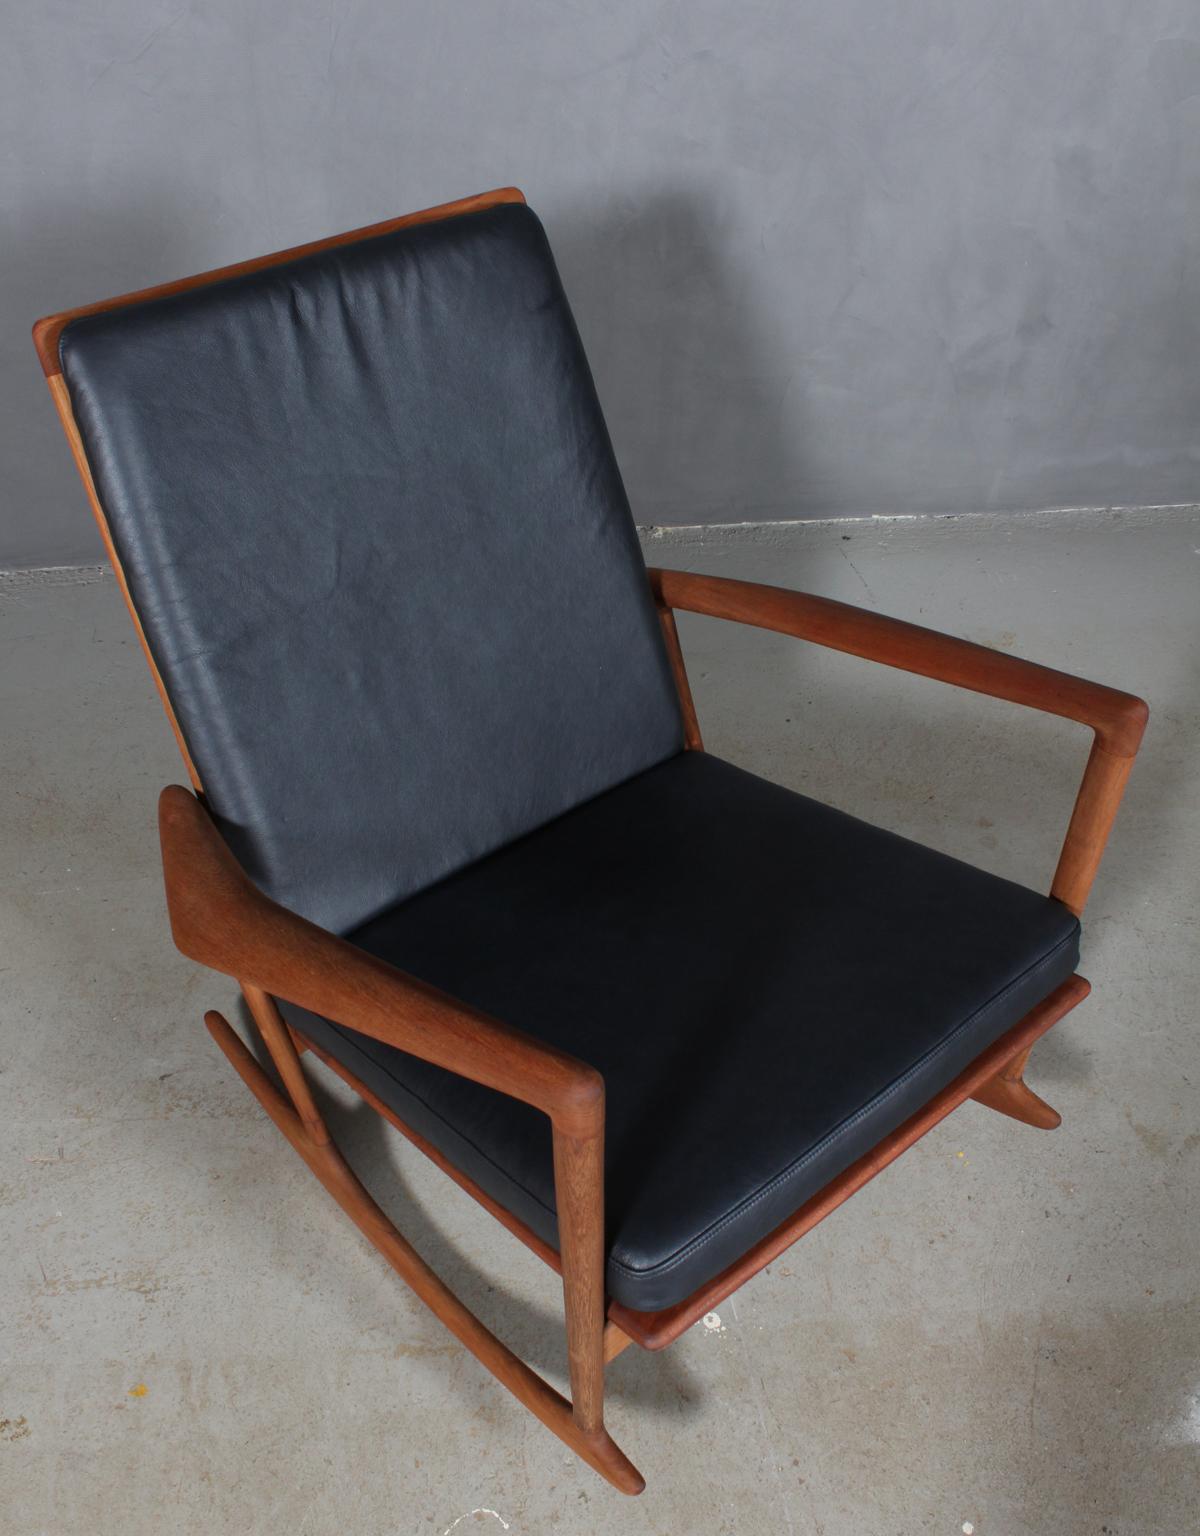 Ib Kofod Larsen rocking chair new upholstered with black aniline leather.

Frame with sculptural arm leans in solid teak.

Model 650-15, made by Christian Linneberg.